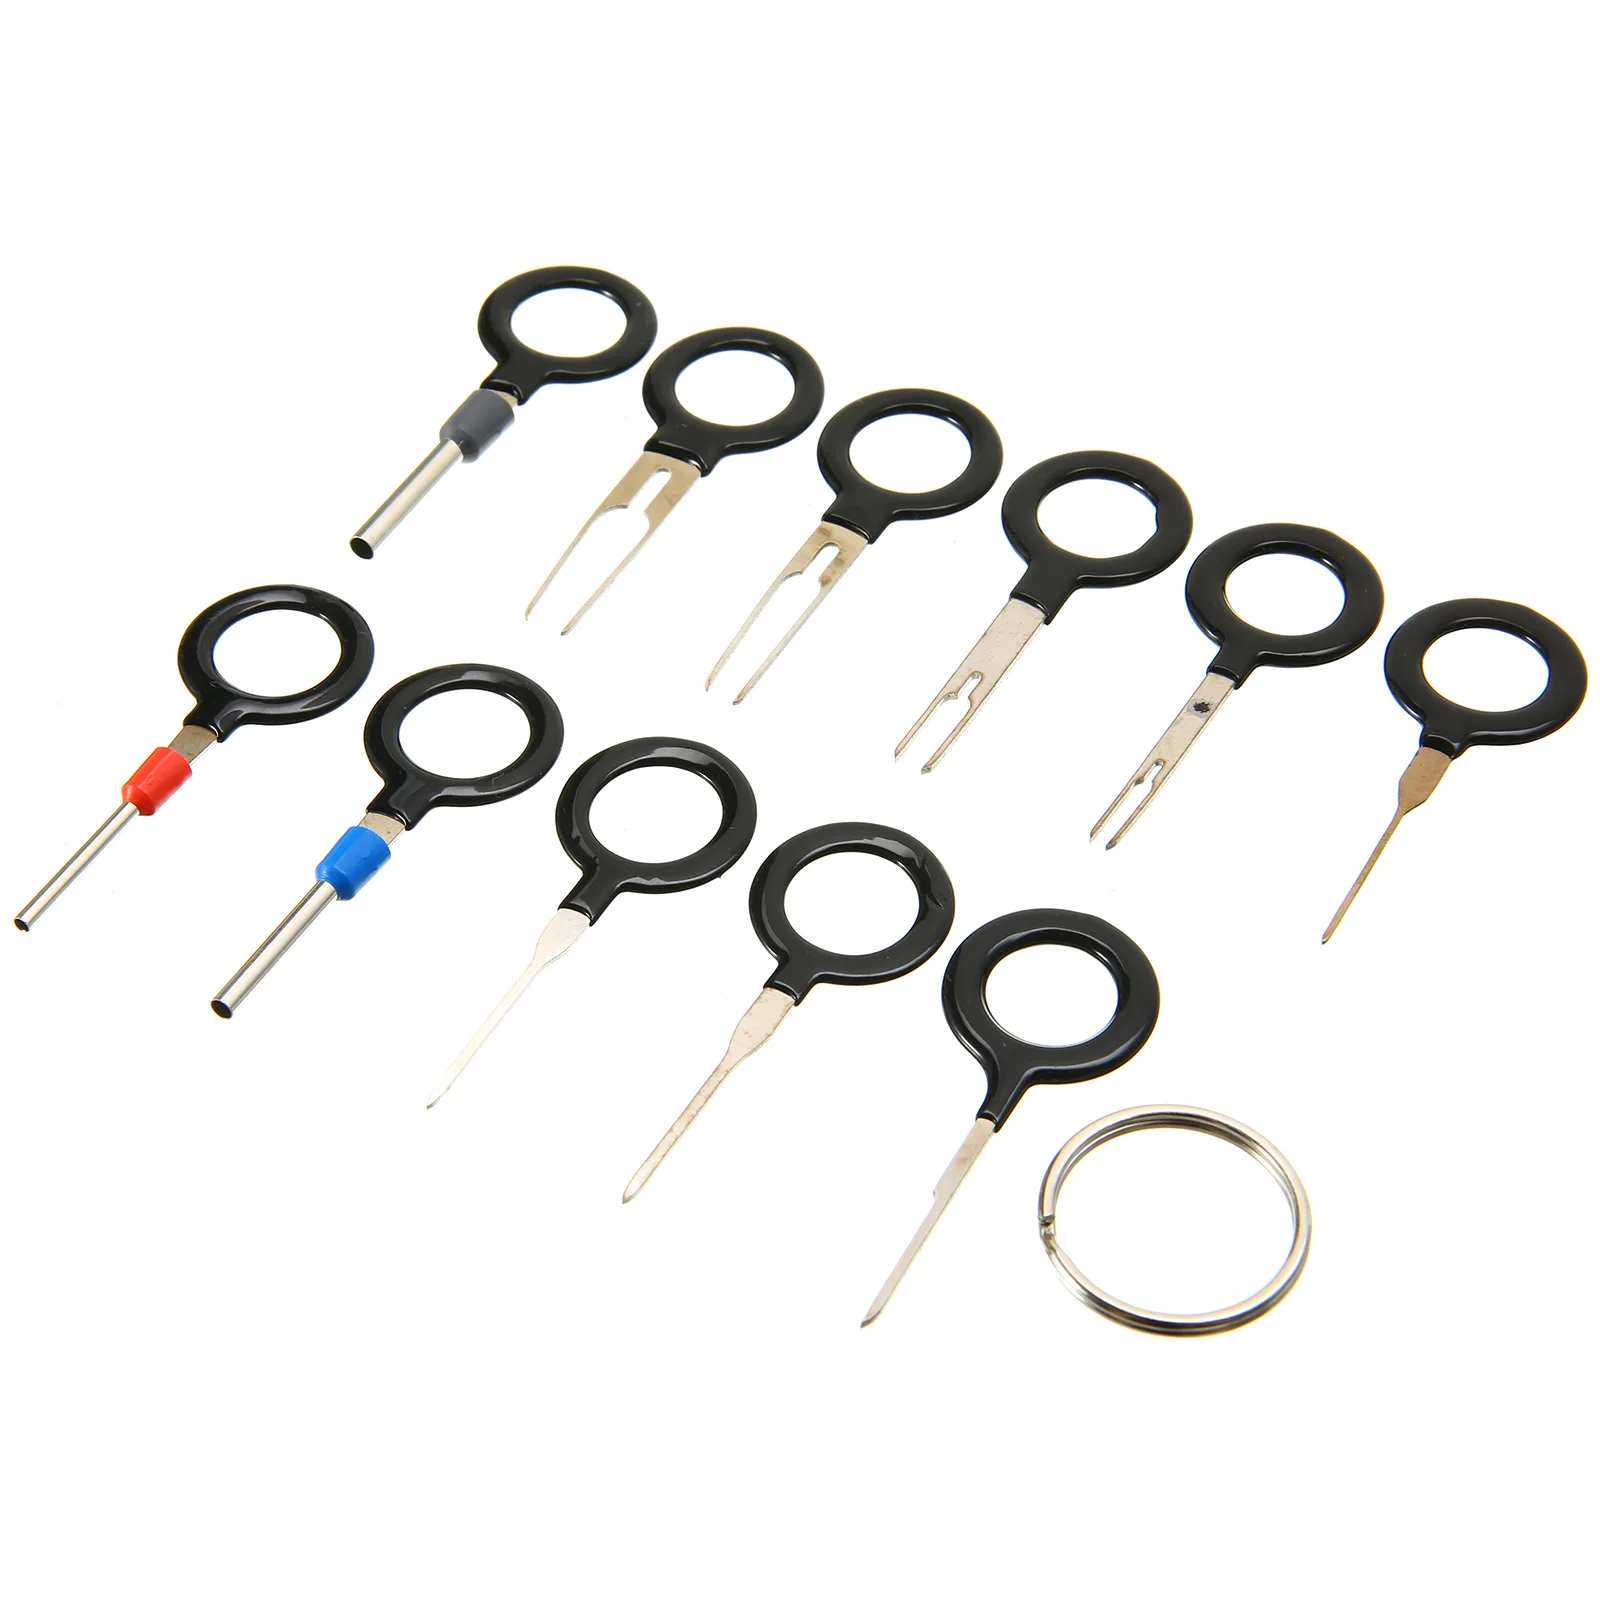 11pcs Car Electrical Wiring Crimp Terminal/Connector/Pin Removal Key Tool Kit Universal for all CAR SUV Pickup Off-road